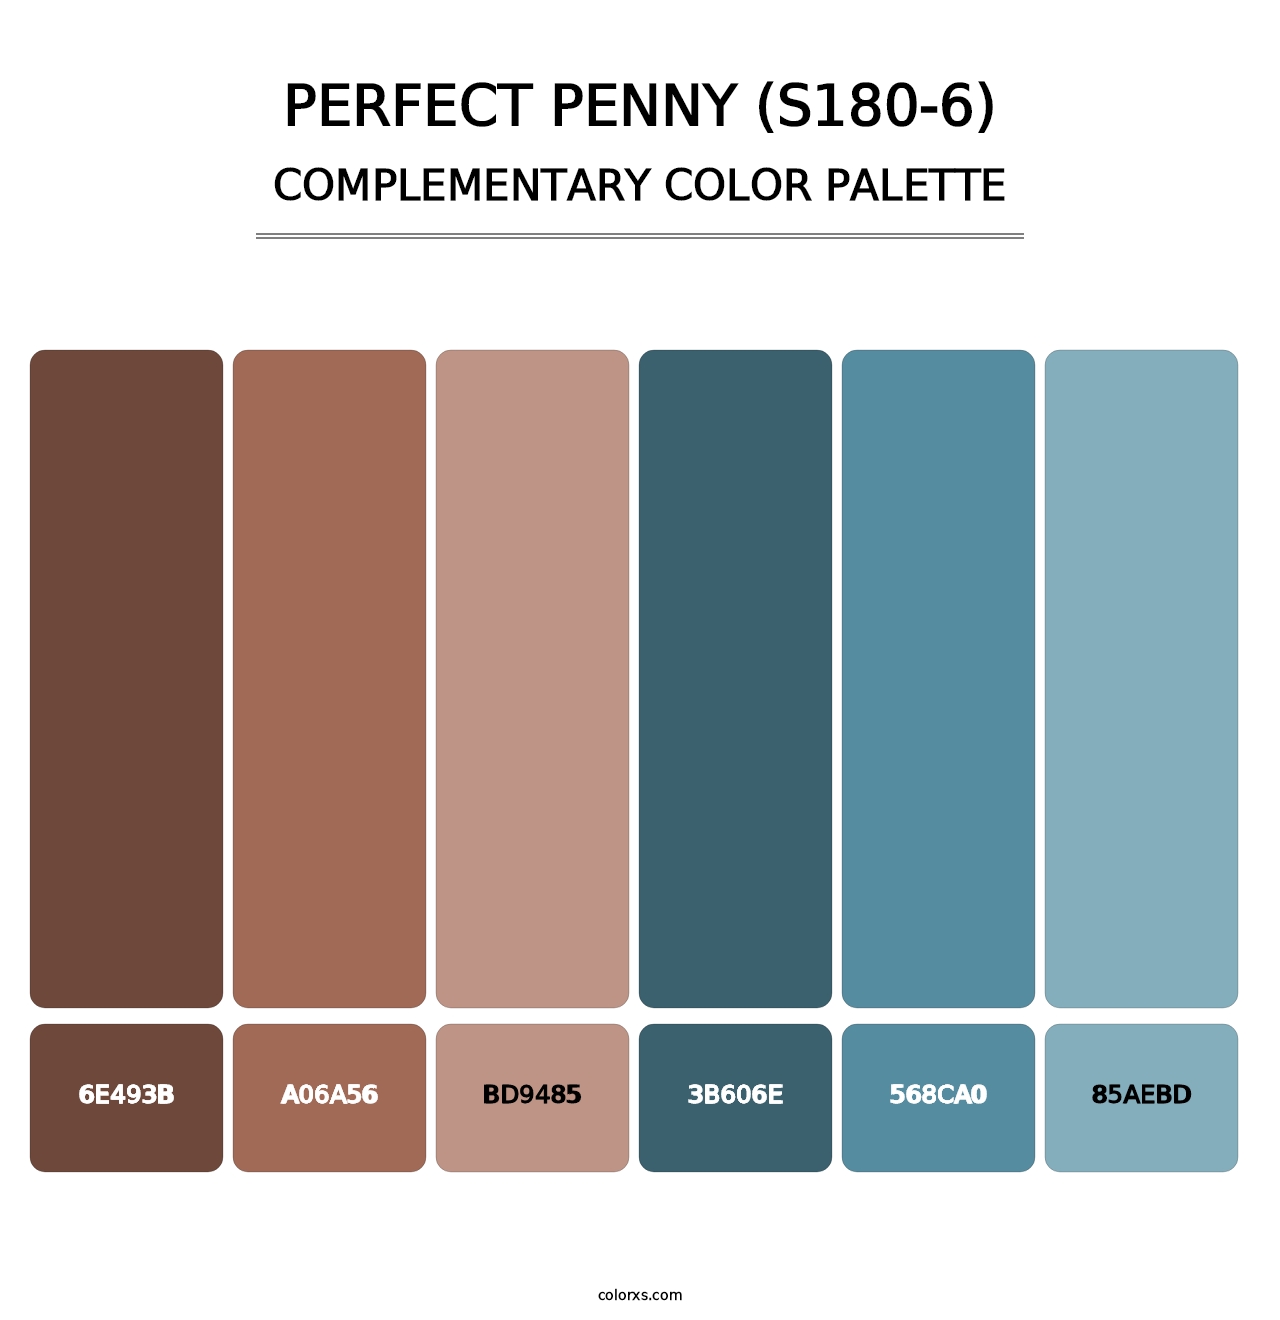 Perfect Penny (S180-6) - Complementary Color Palette